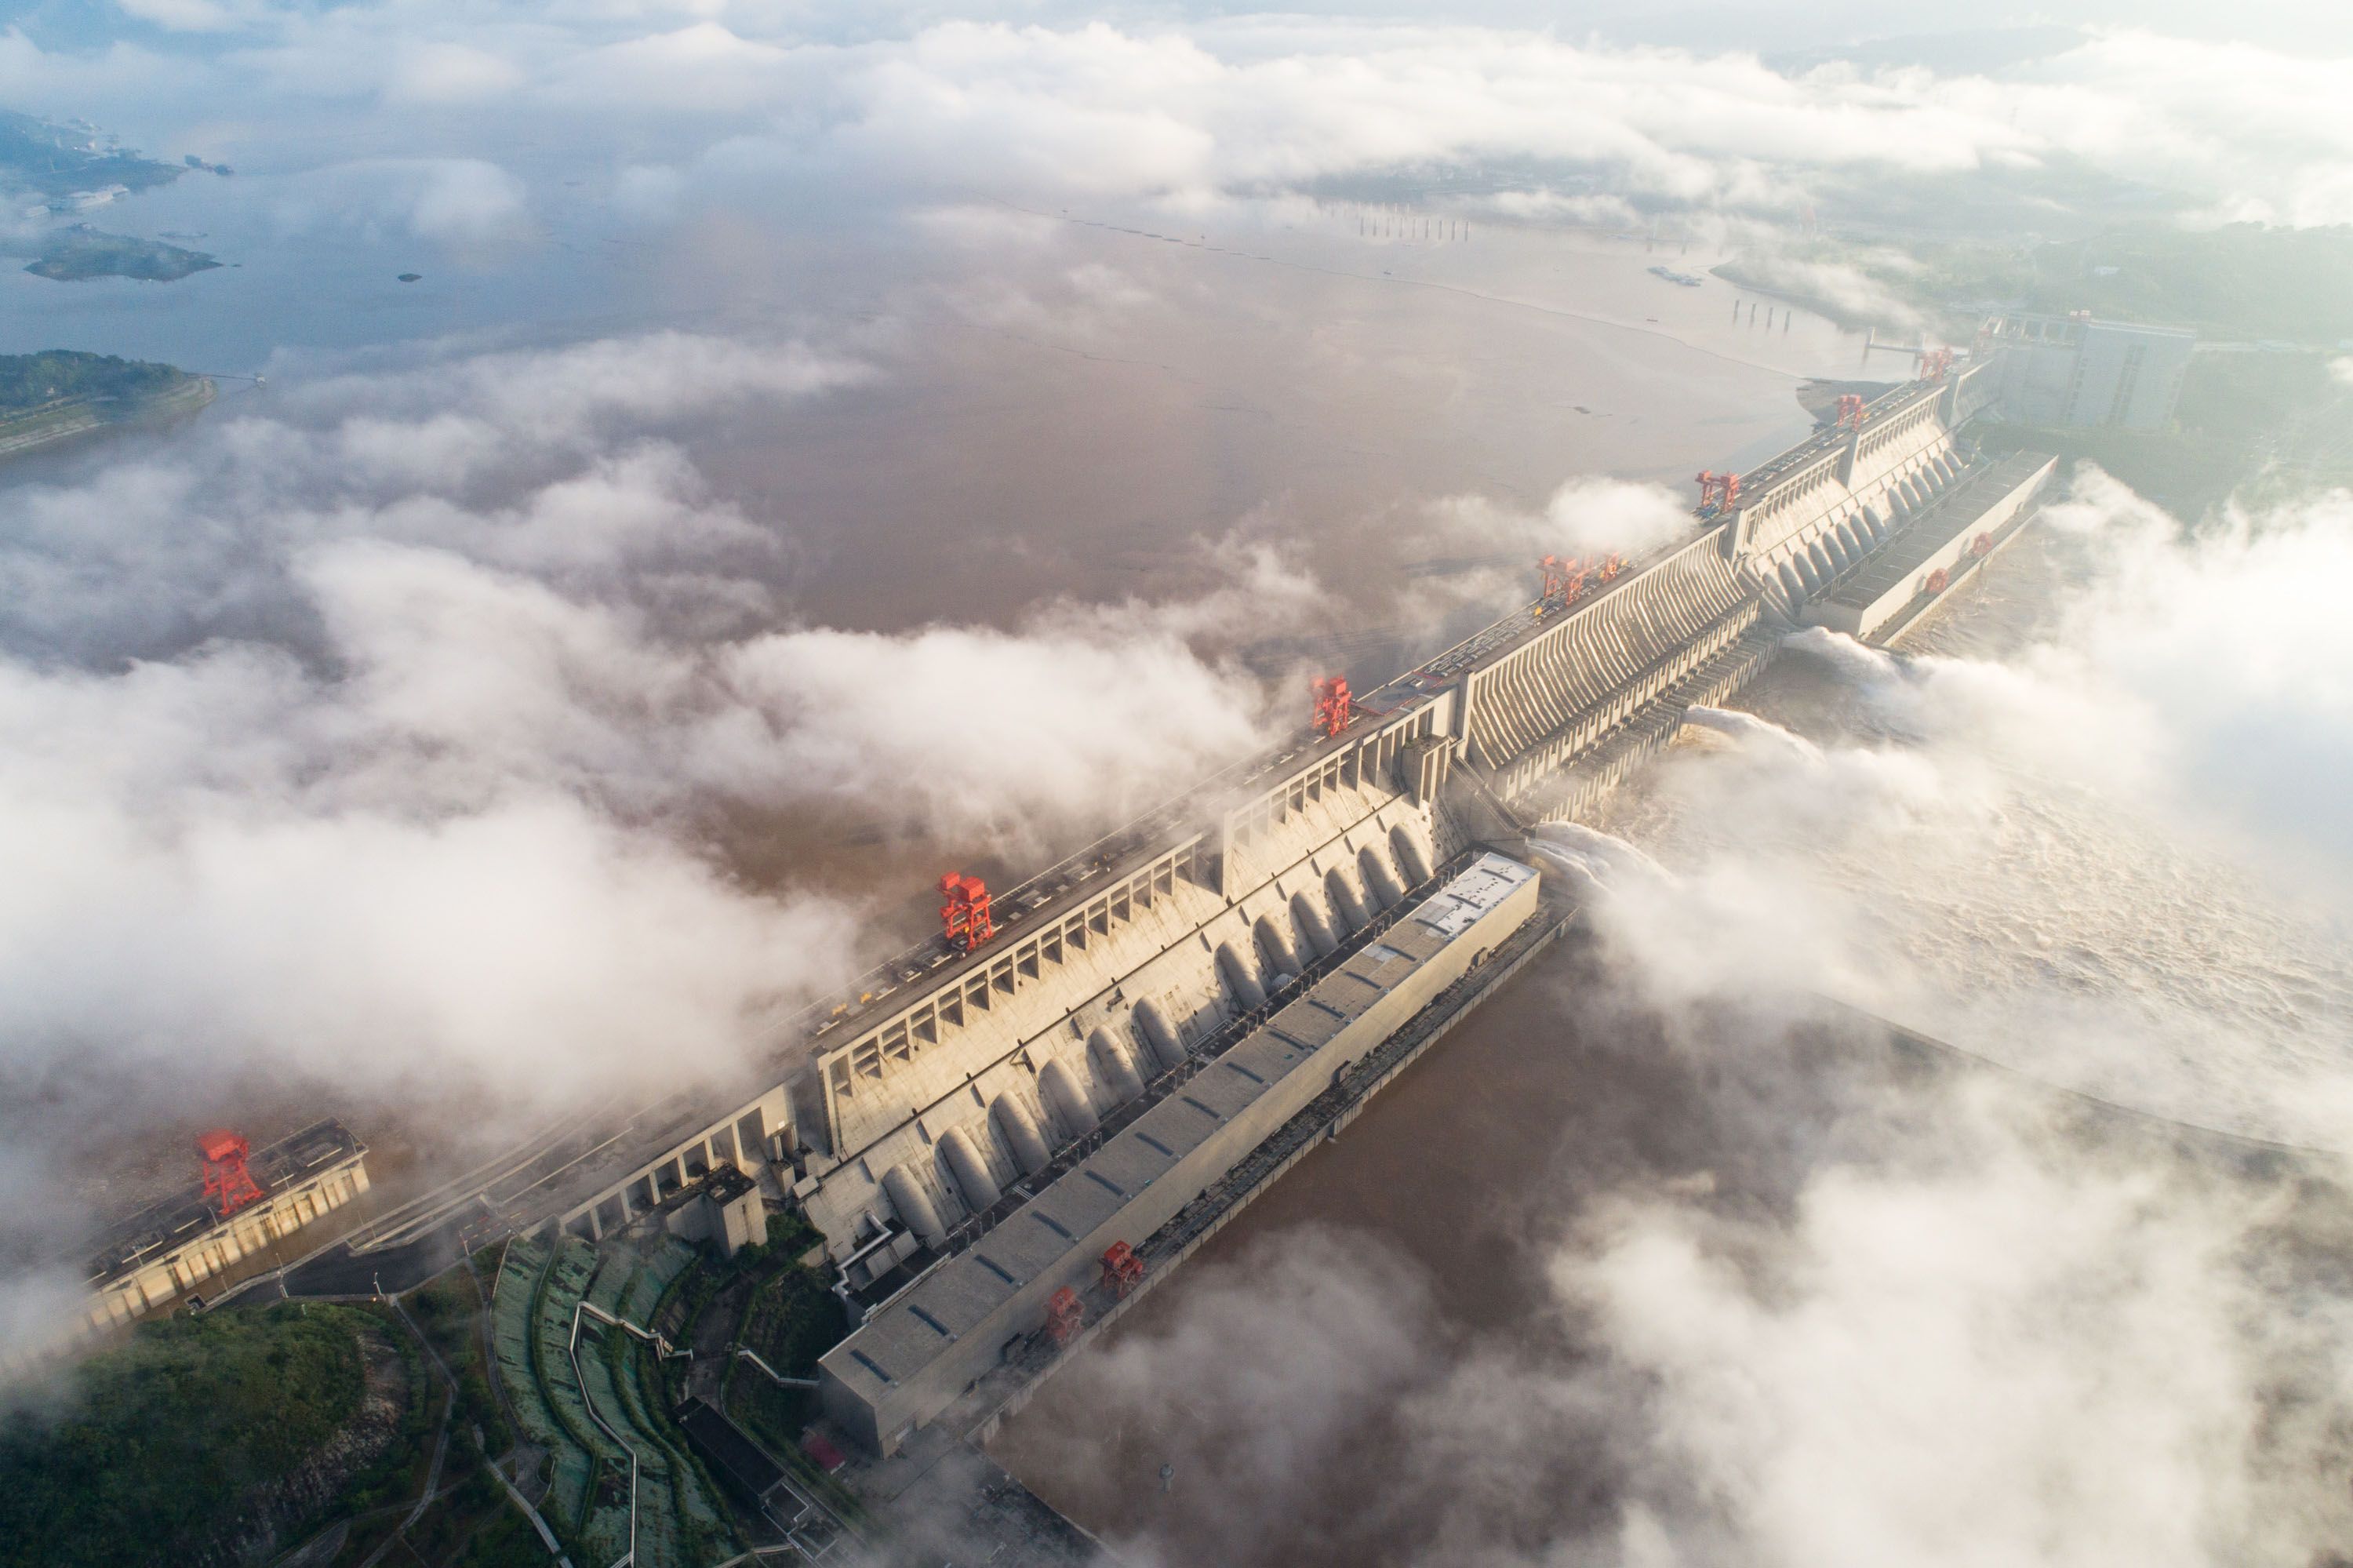 Three Gorges Dam: Was China's project worth building?